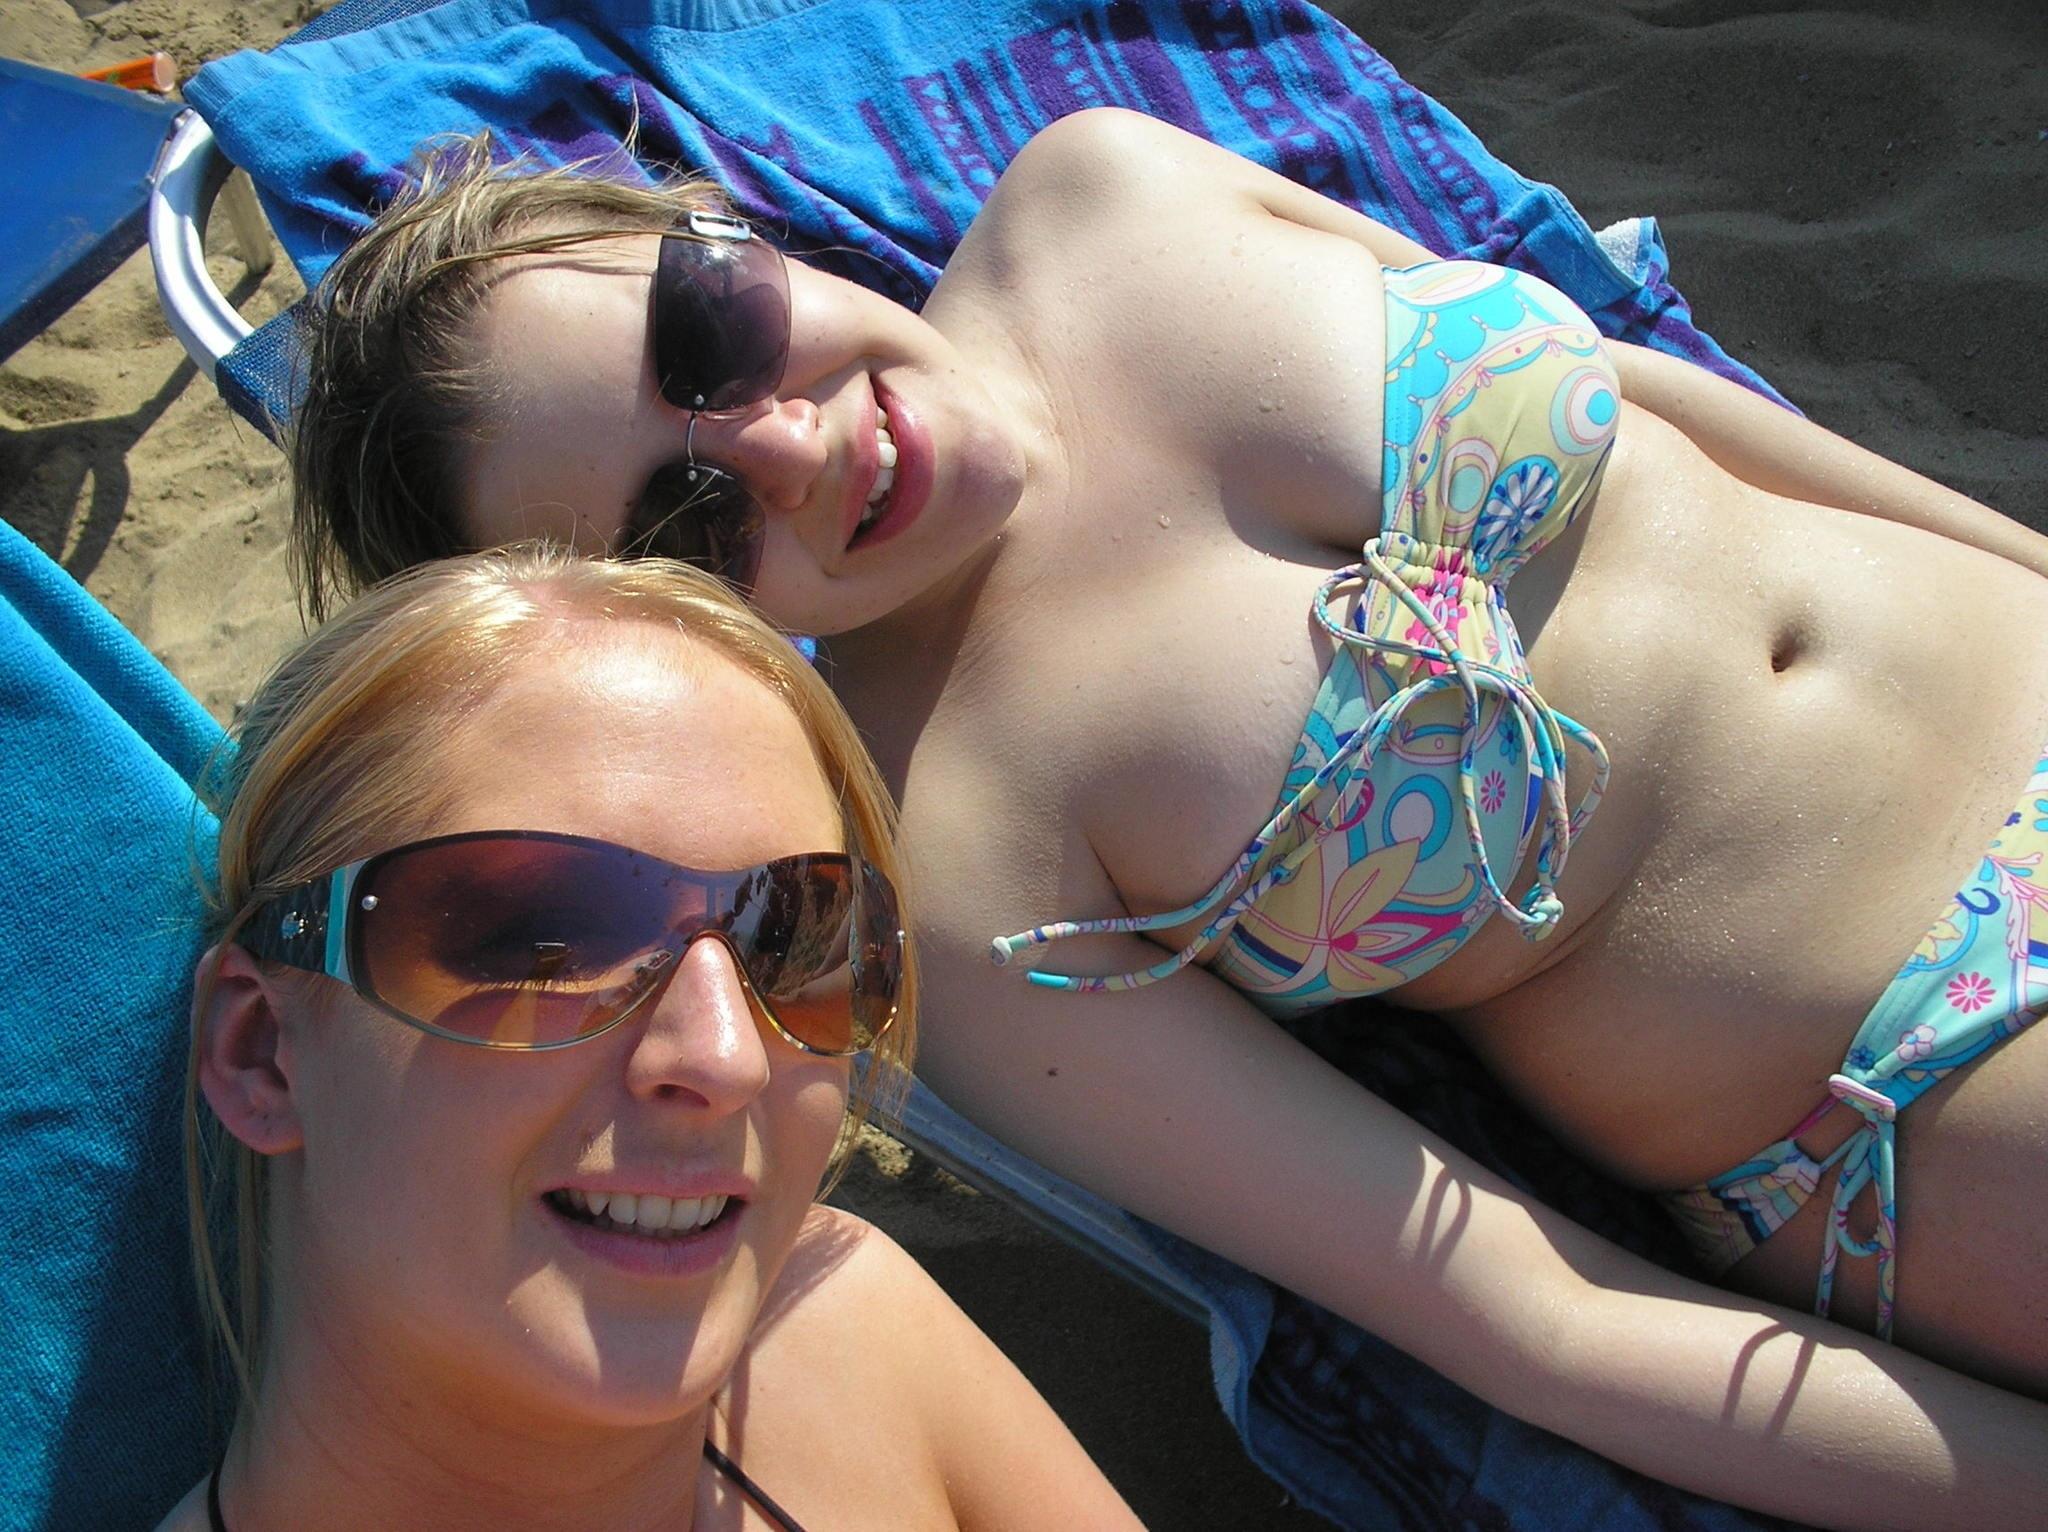 Two nude amateur babes at beach